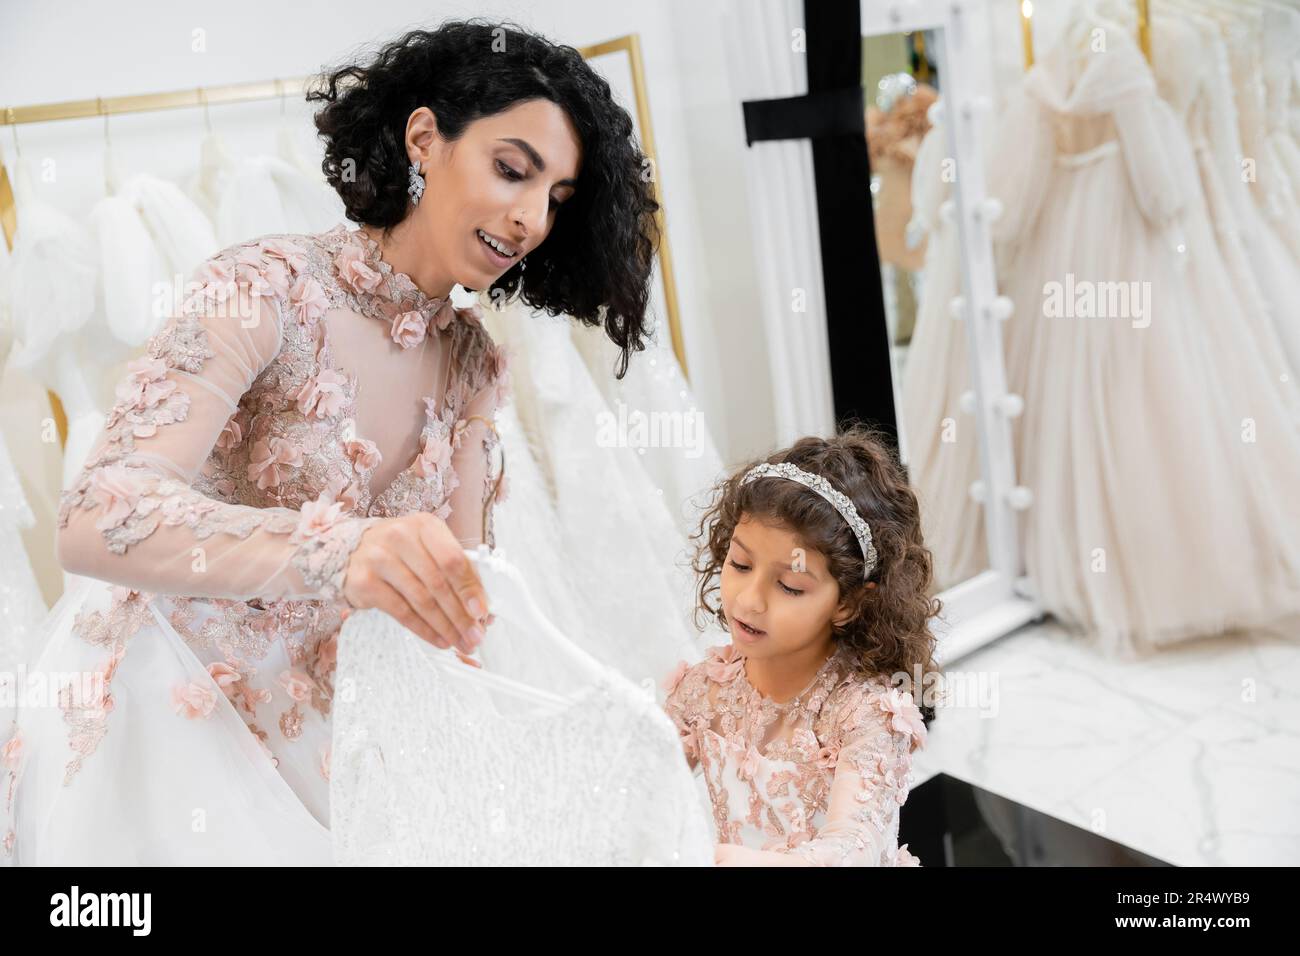 brunette middle eastern bride in floral wedding gown helping to choose dress for her cute little daughter in bridal boutique around white tulle fabric Stock Photo